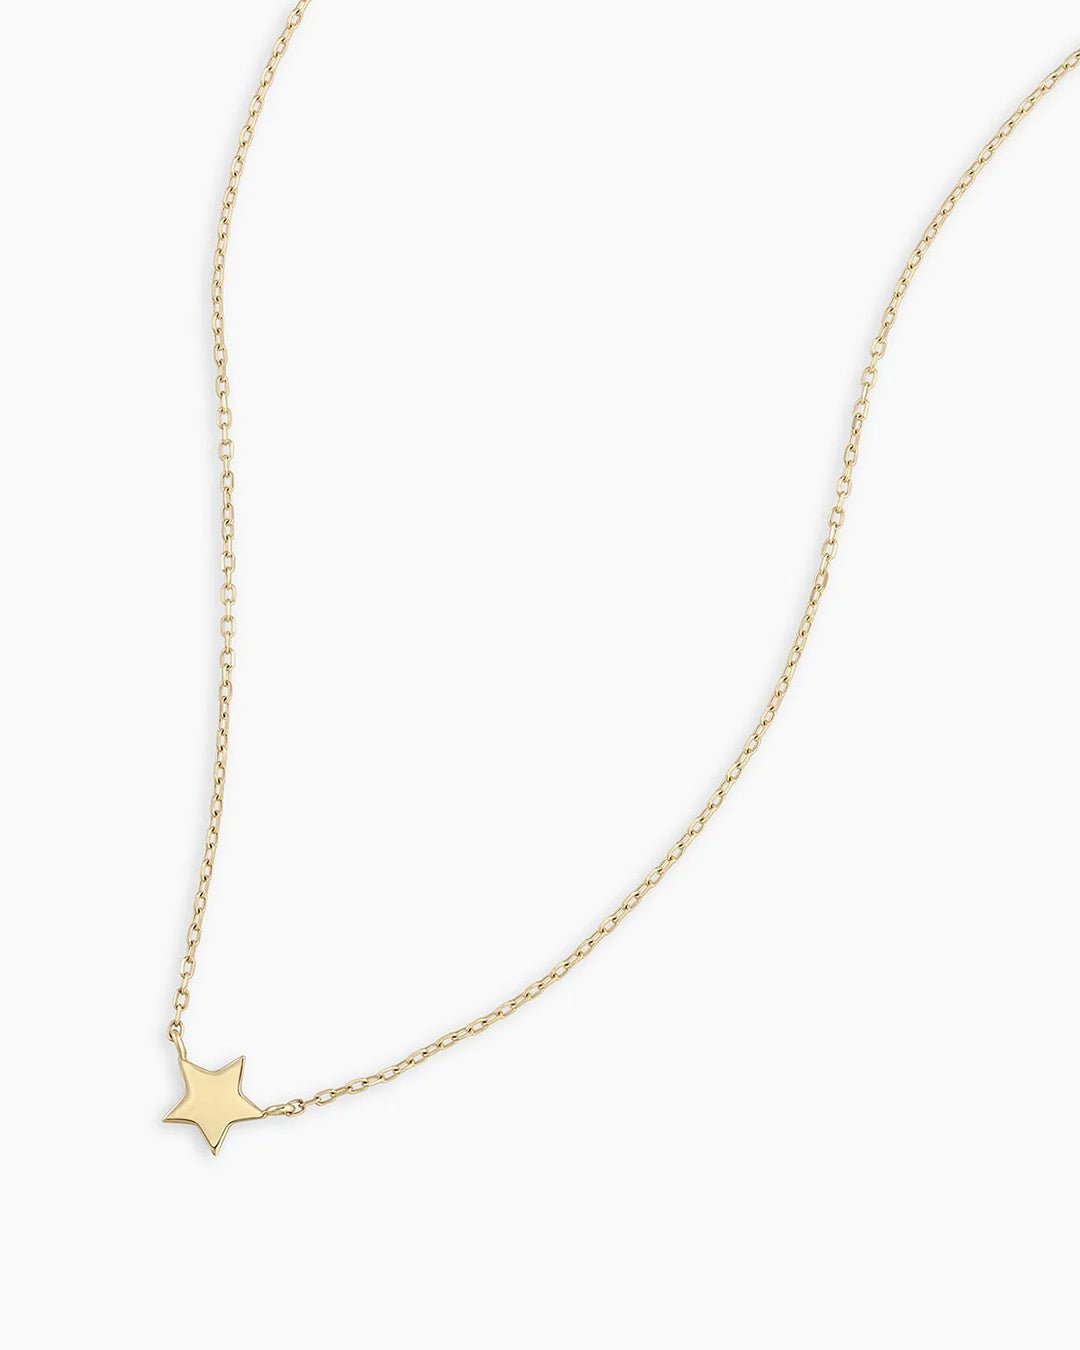 Star Necklace in 14K Solid Gold, Women's by Gorjana